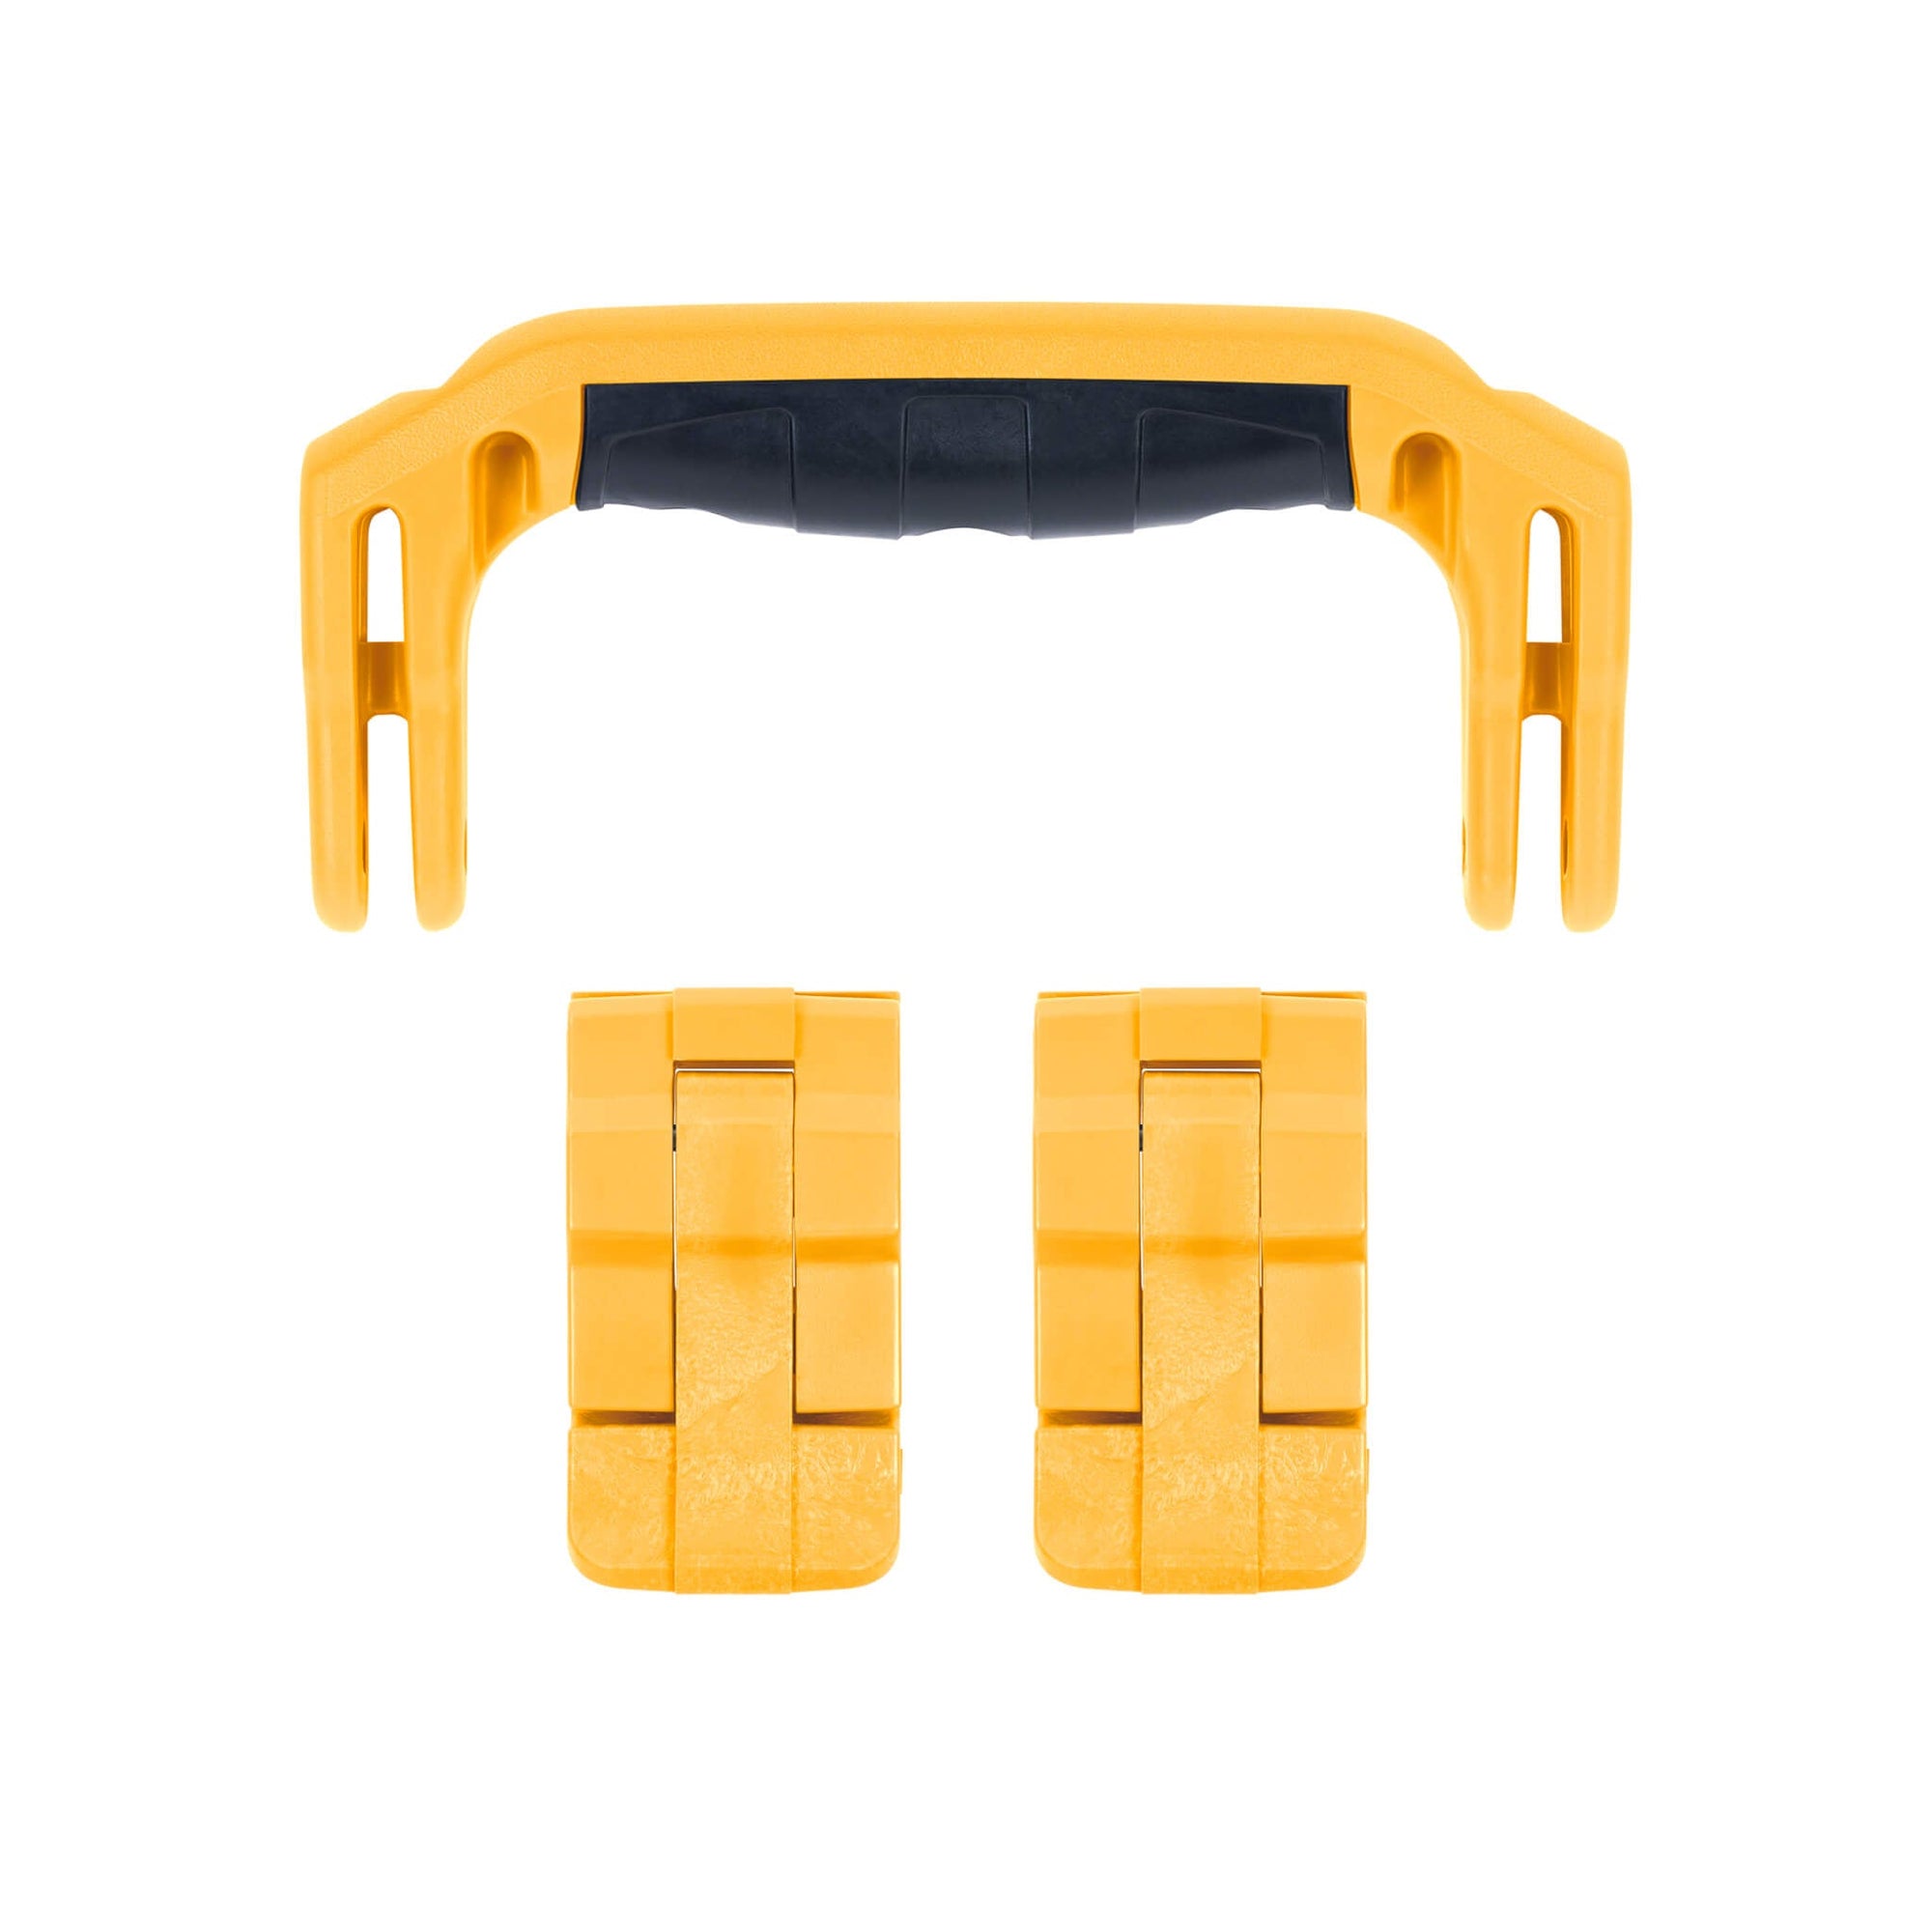 Pelican 1430 Replacement Handle & Latches, Yellow (Set of 1 Handle, 2 Latches) ColorCase 